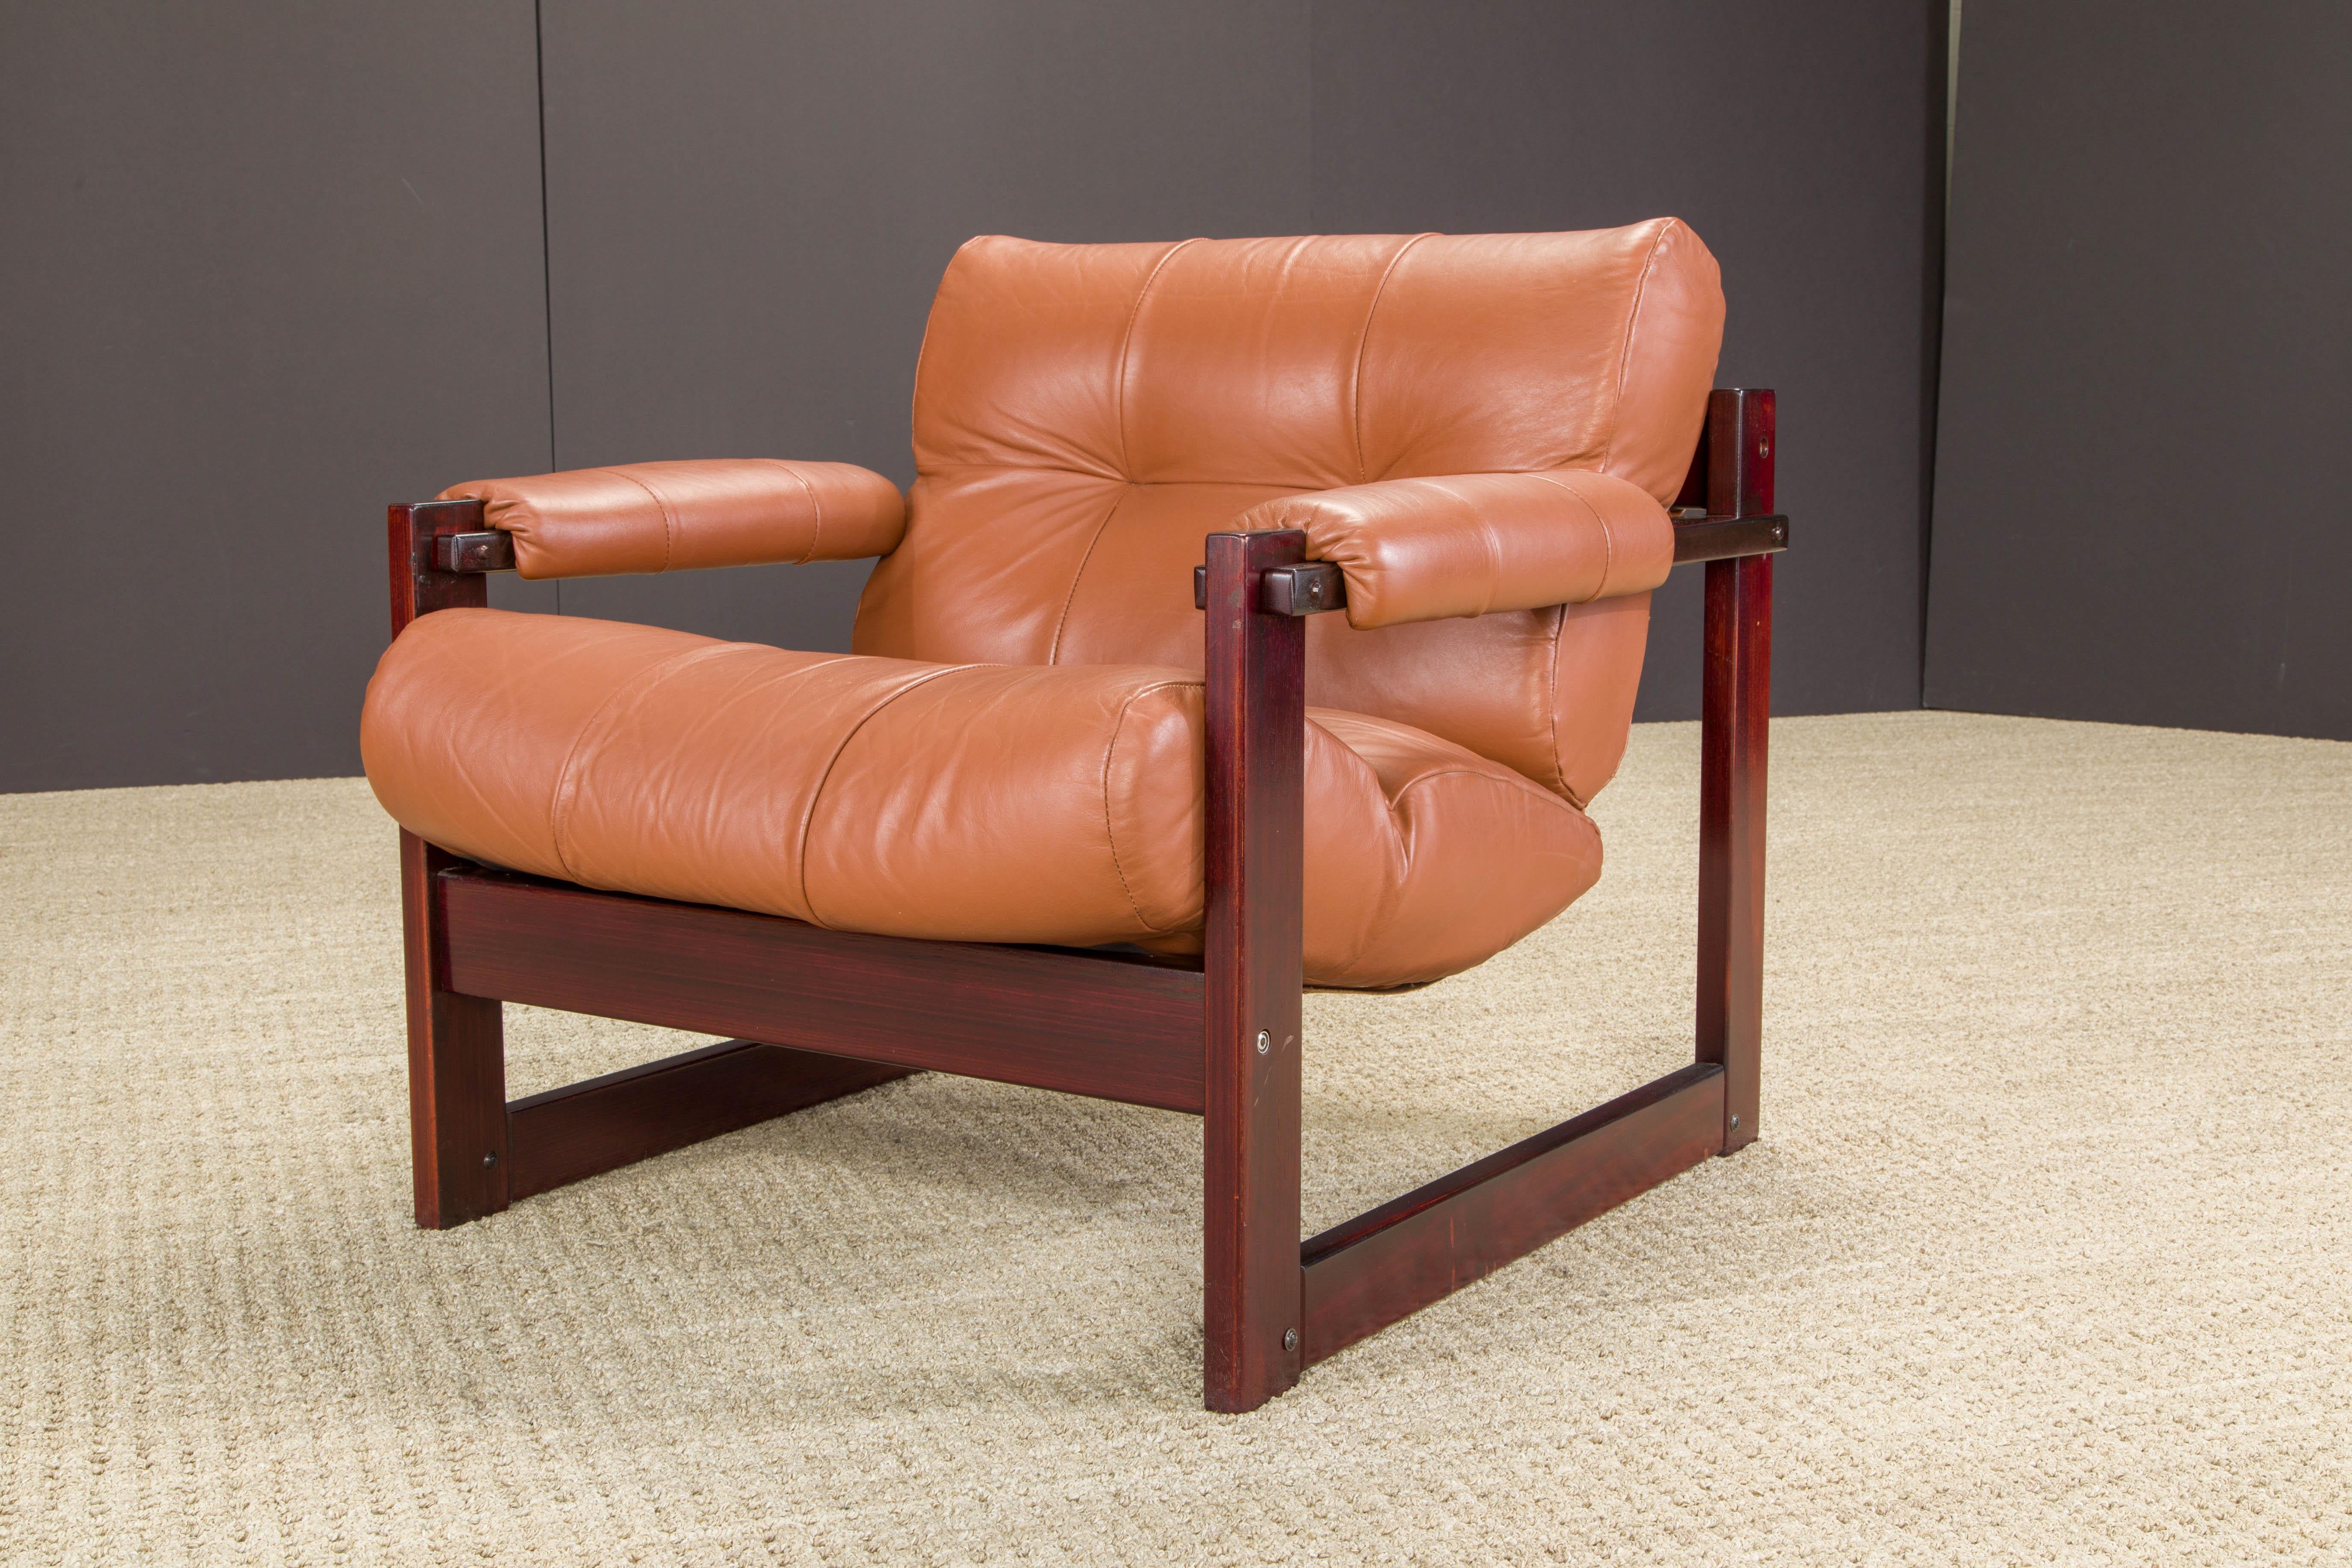 Percival Lafer 'S-1' Rosewood and Leather Lounge Chairs, Brazil, 1976, Signed For Sale 5